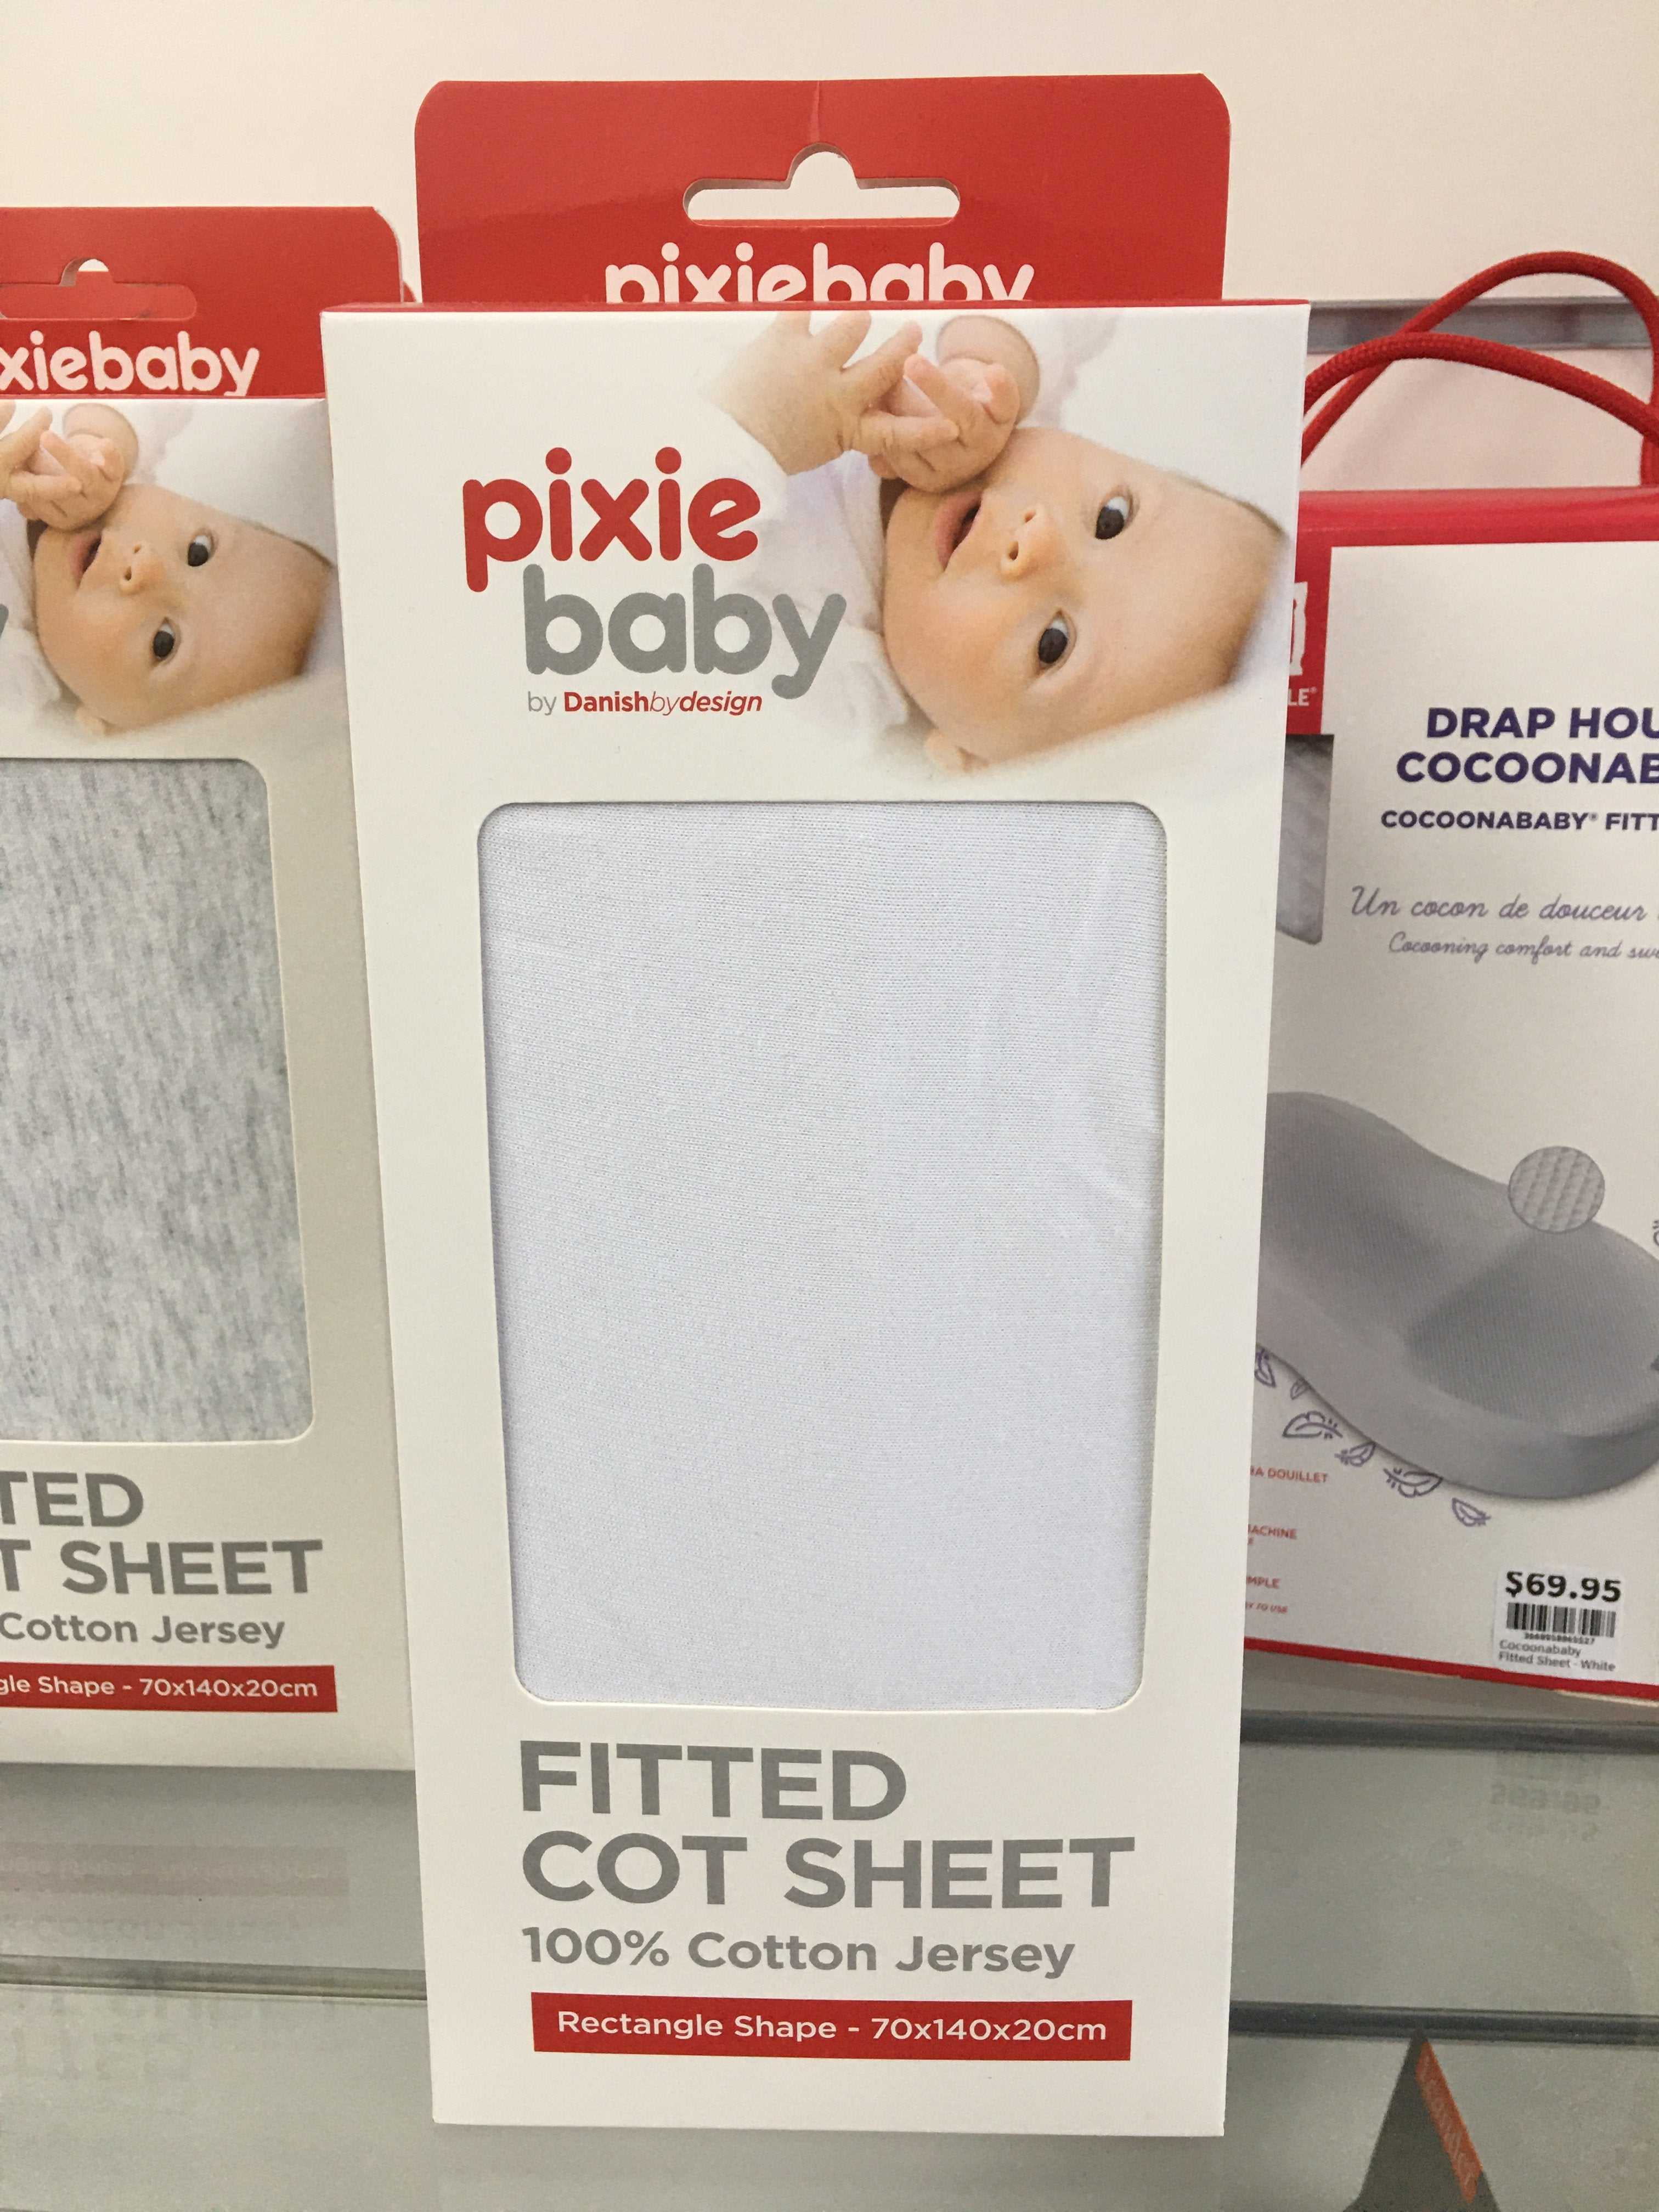 Pixiebaby Cotton Jersey Fitted Cot Sheet - White